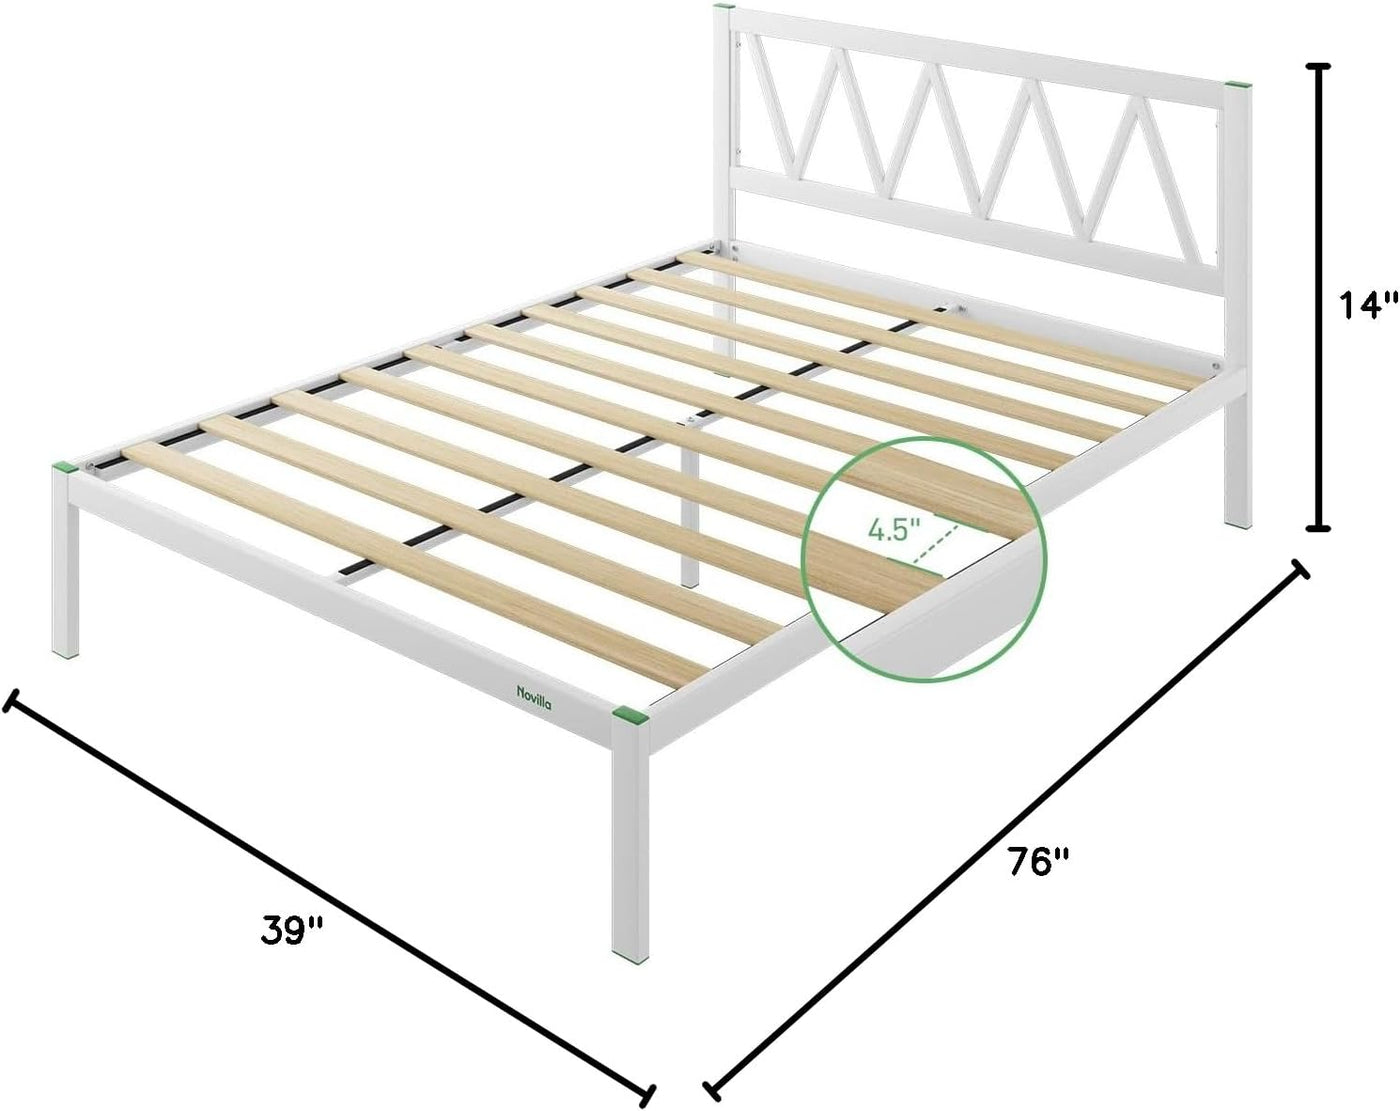 Novilla 14 Inch Twin Size Bed Frame with Headboard - $70